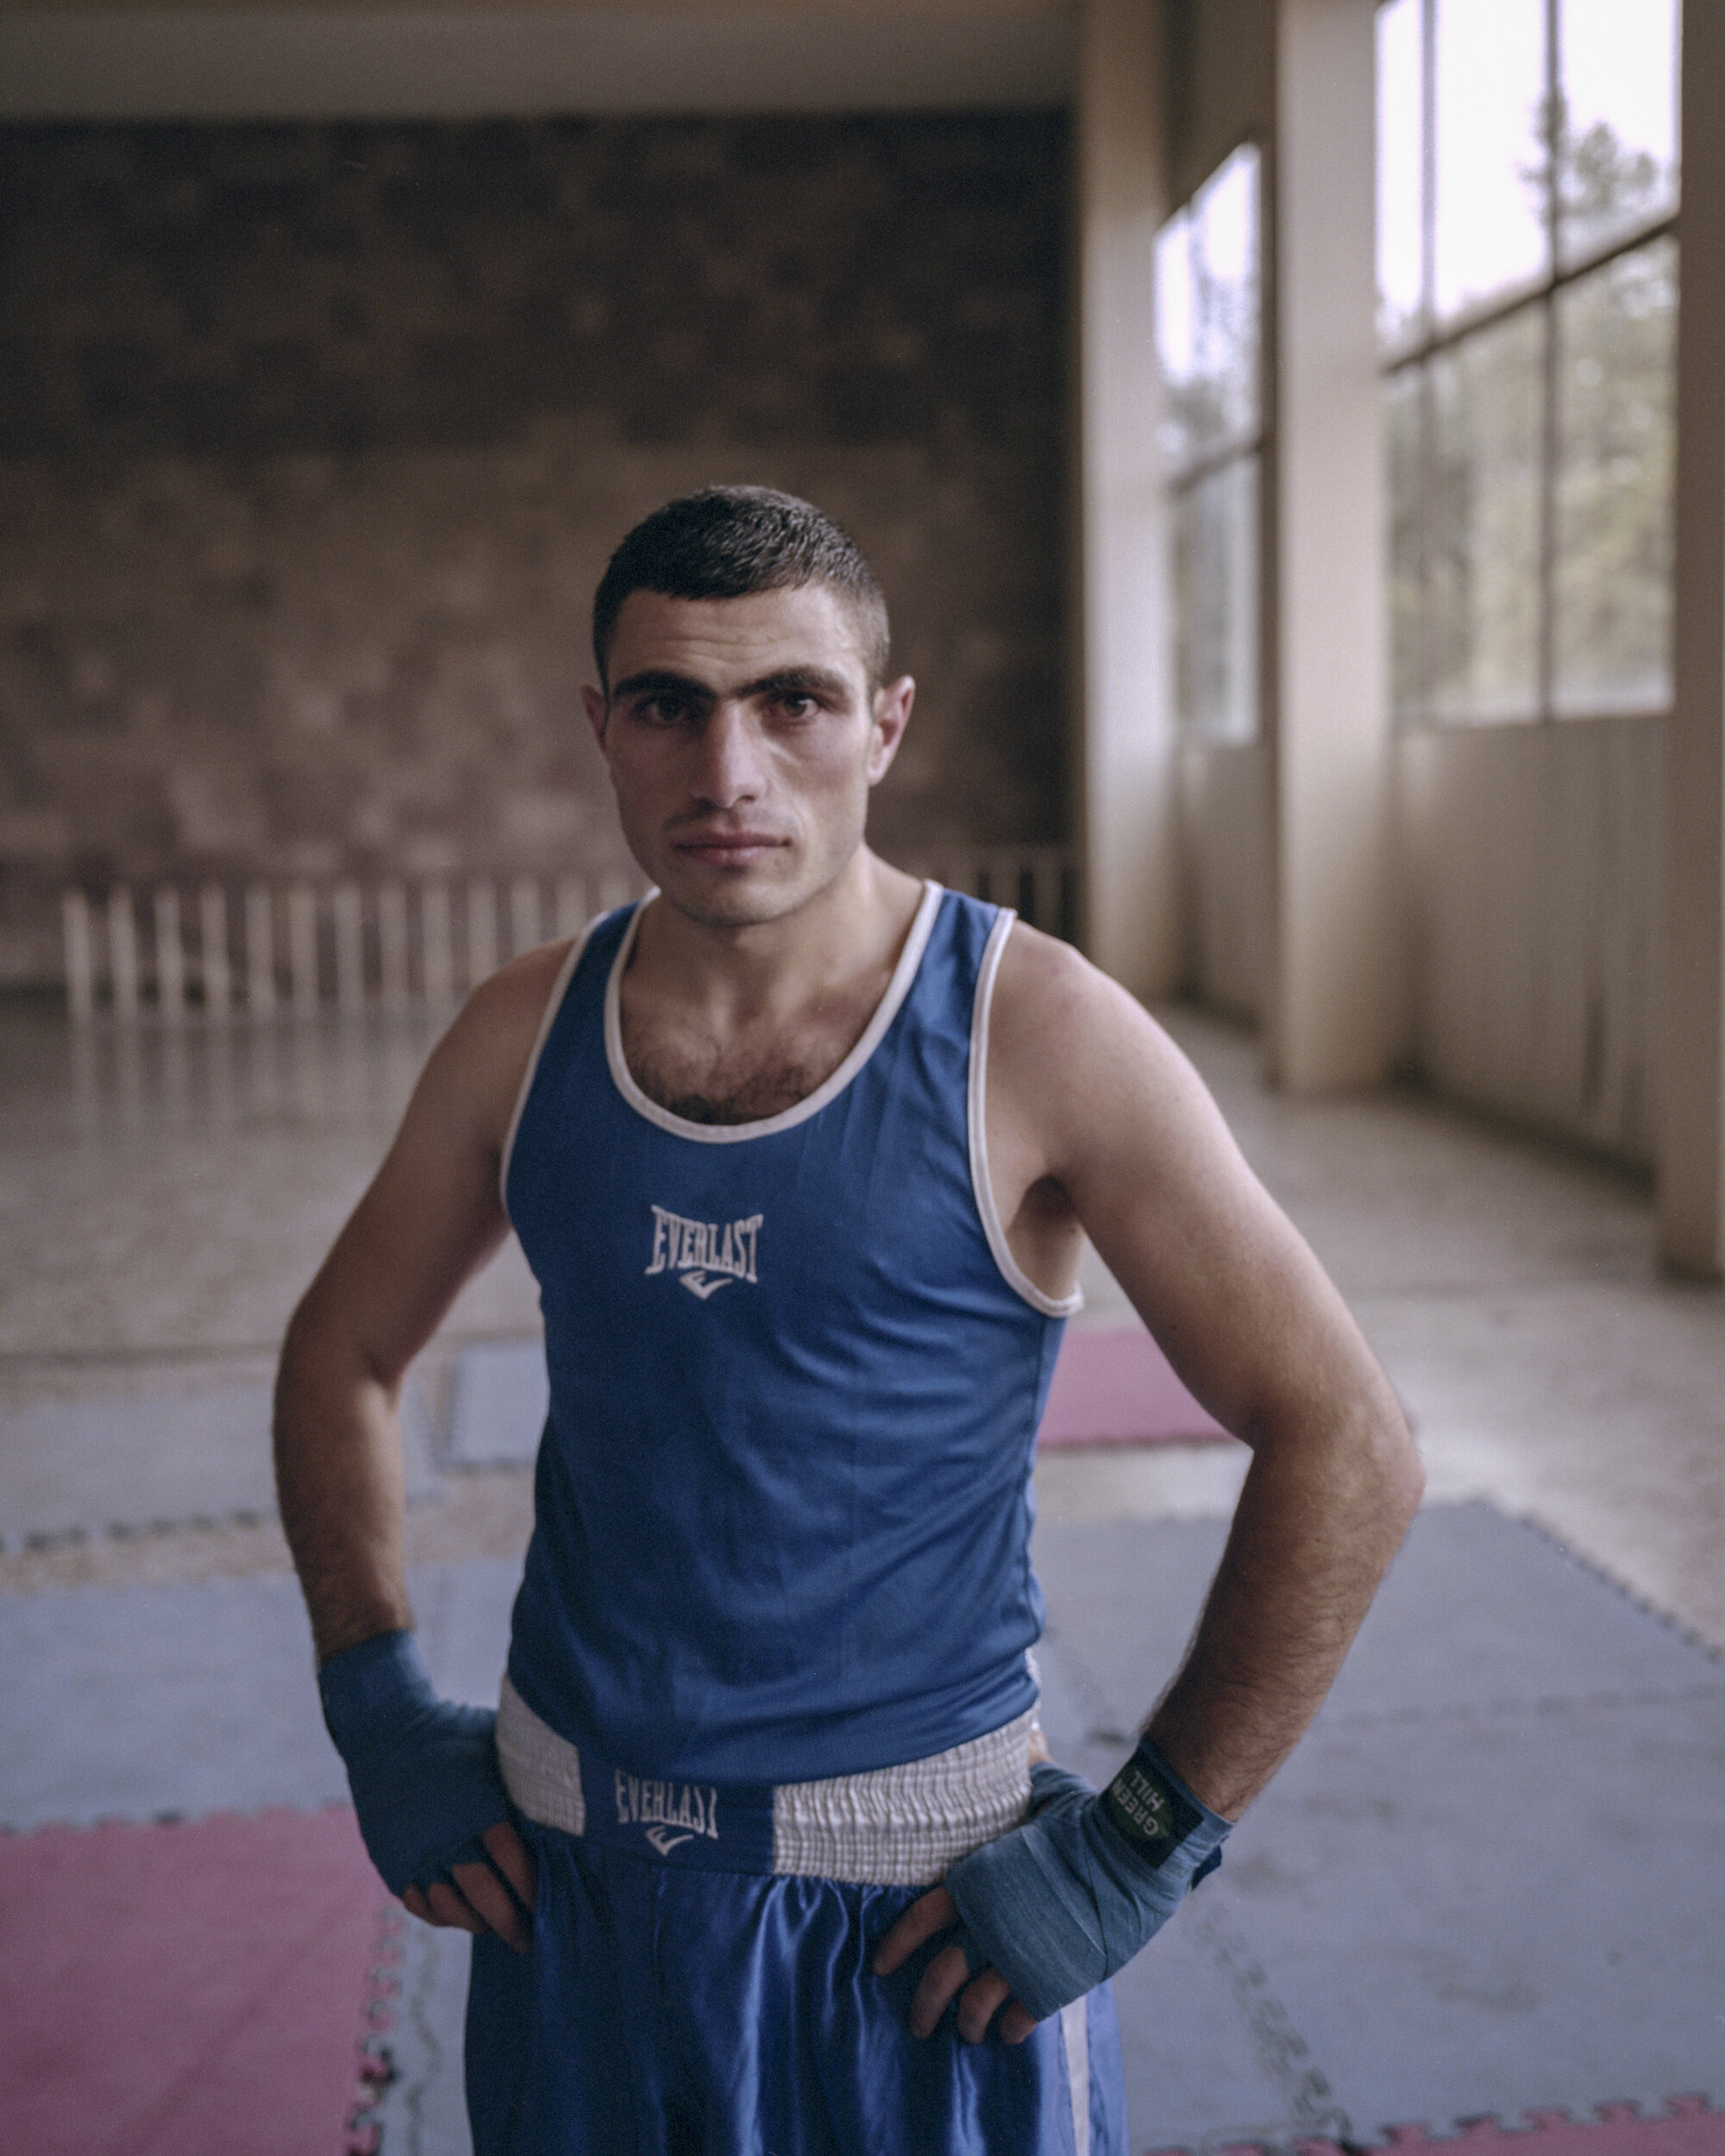   A boxer after losing a match at the annually held National Box Championship in Dynamo Sport Club.  Yerevan, Armenia, 2018  